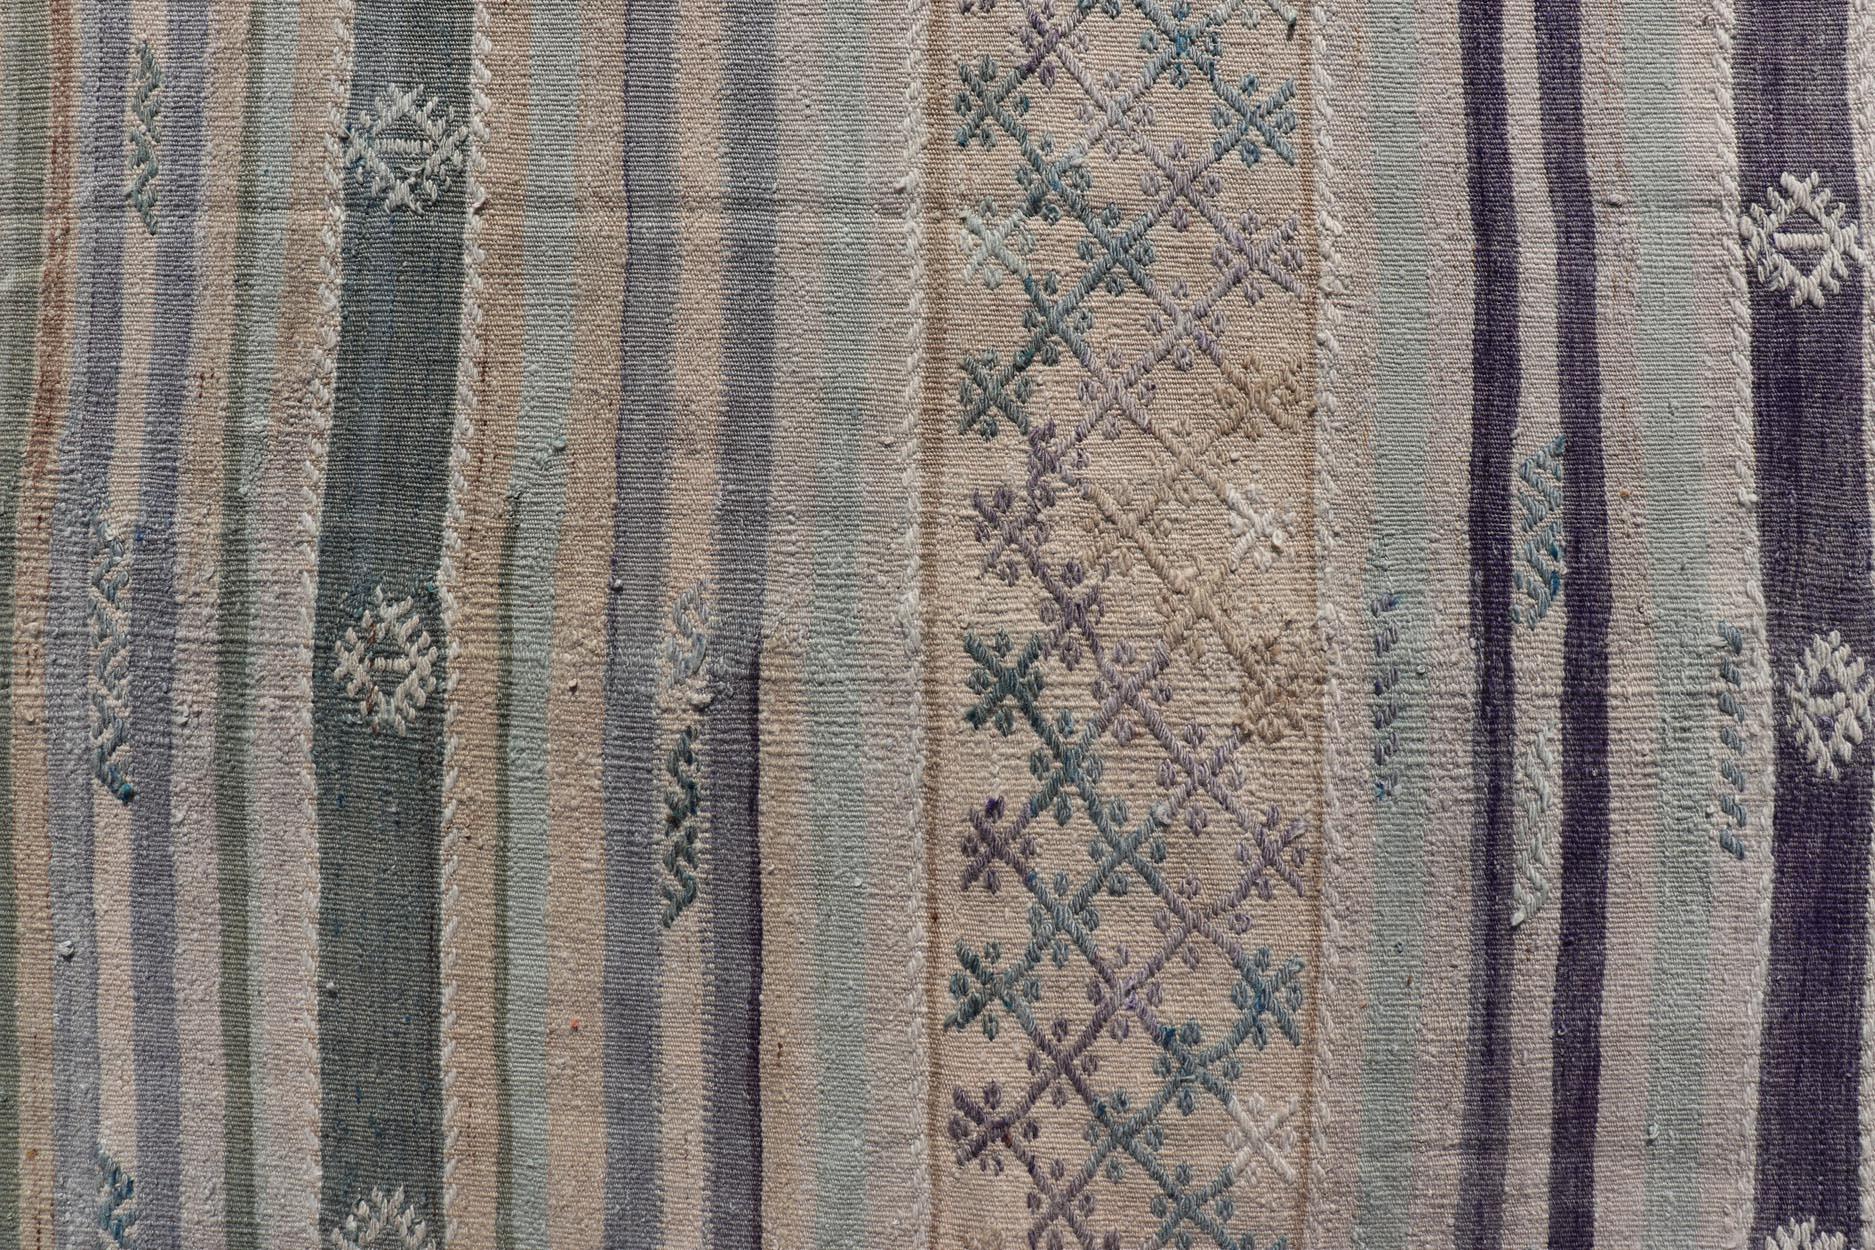 Vintage Turkish Embroidered Kilim in Stripes in Shades of Gray, and Light Green In Good Condition For Sale In Atlanta, GA